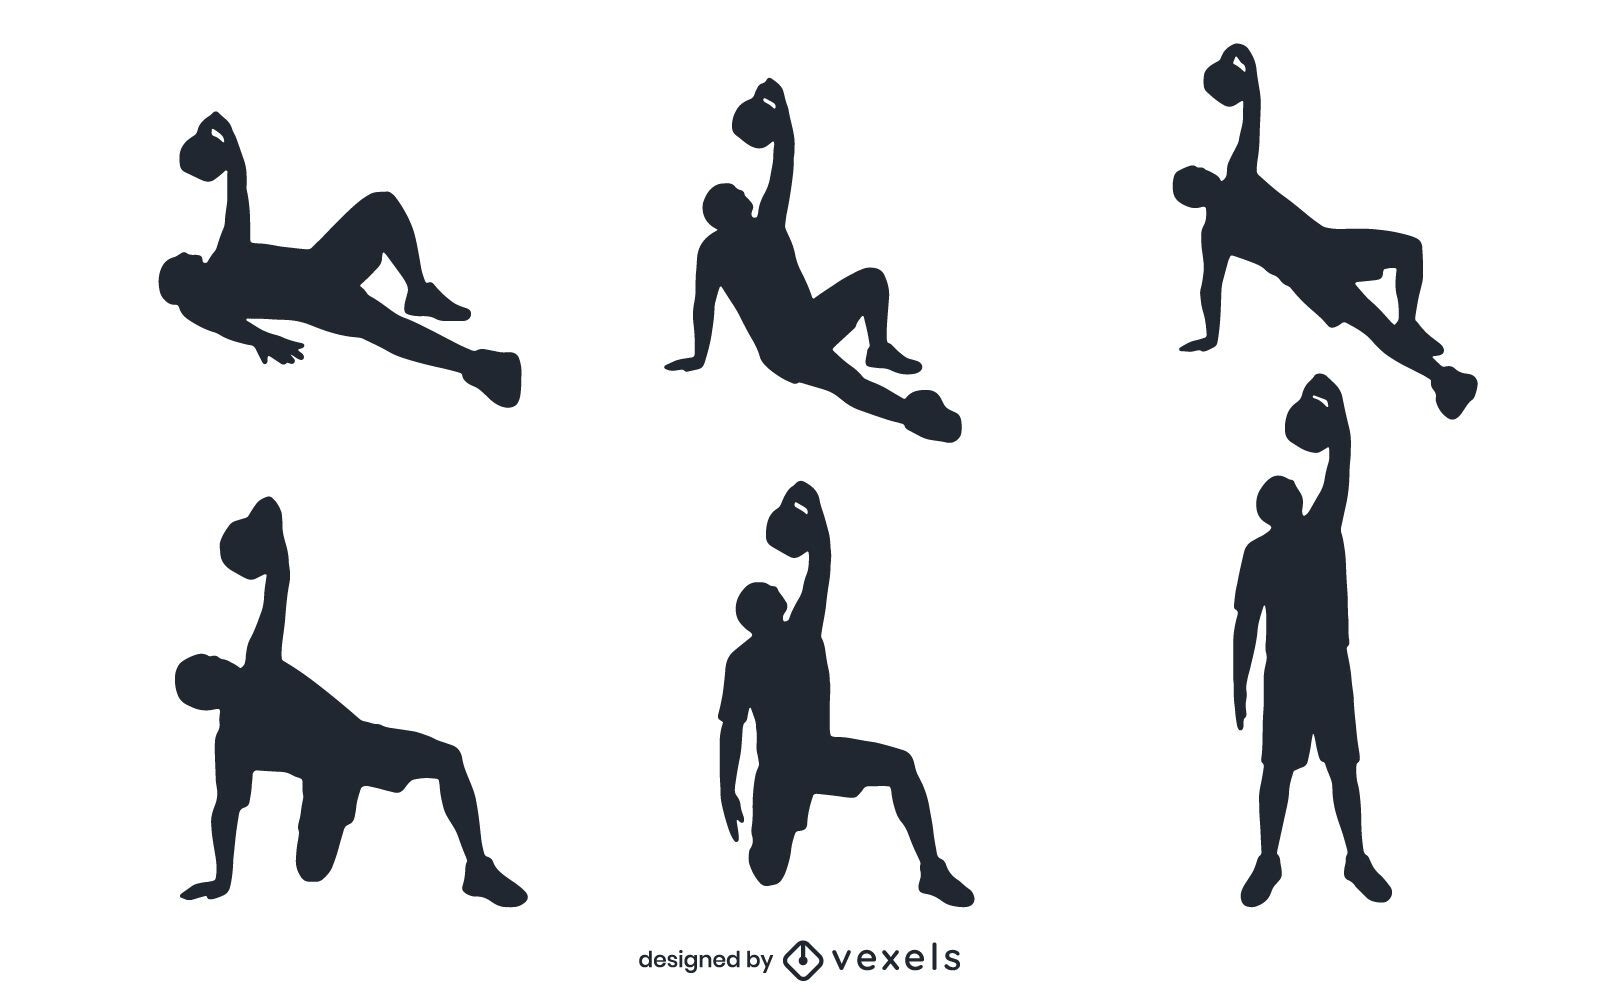 People working out silhouette set